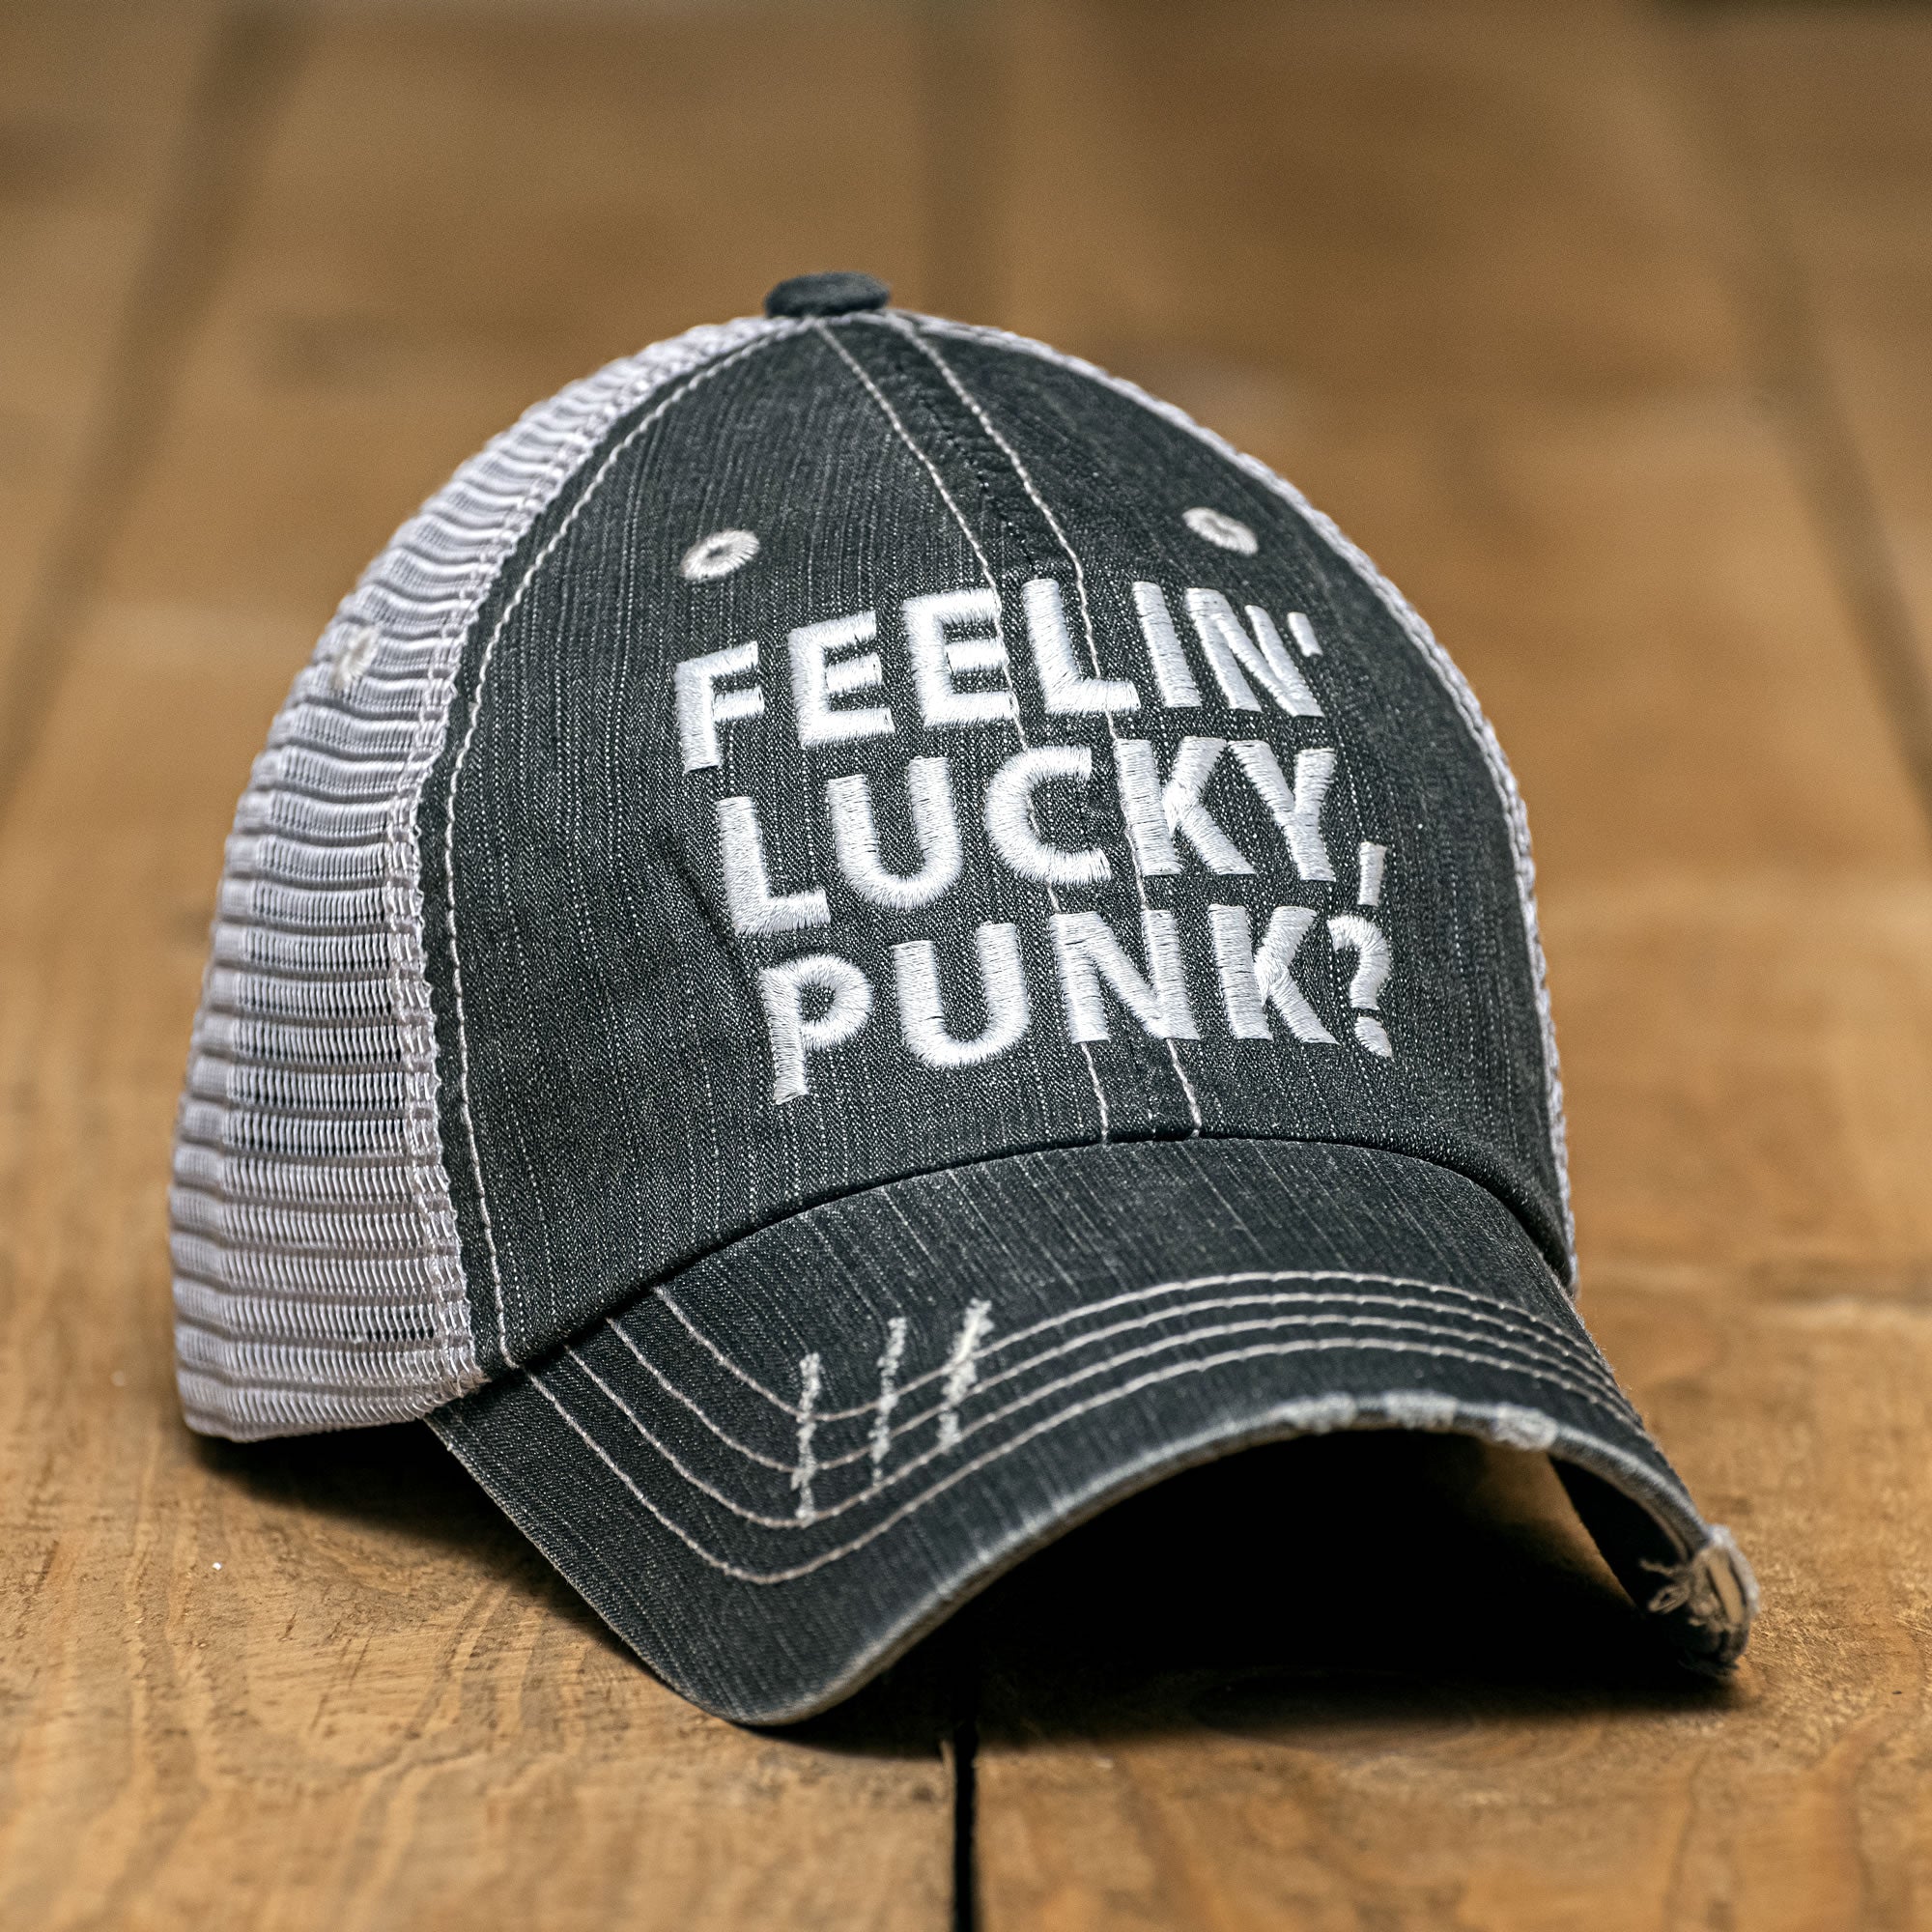 Feelin' Lucky, Punk? Distressed Hat Hats Black One size 